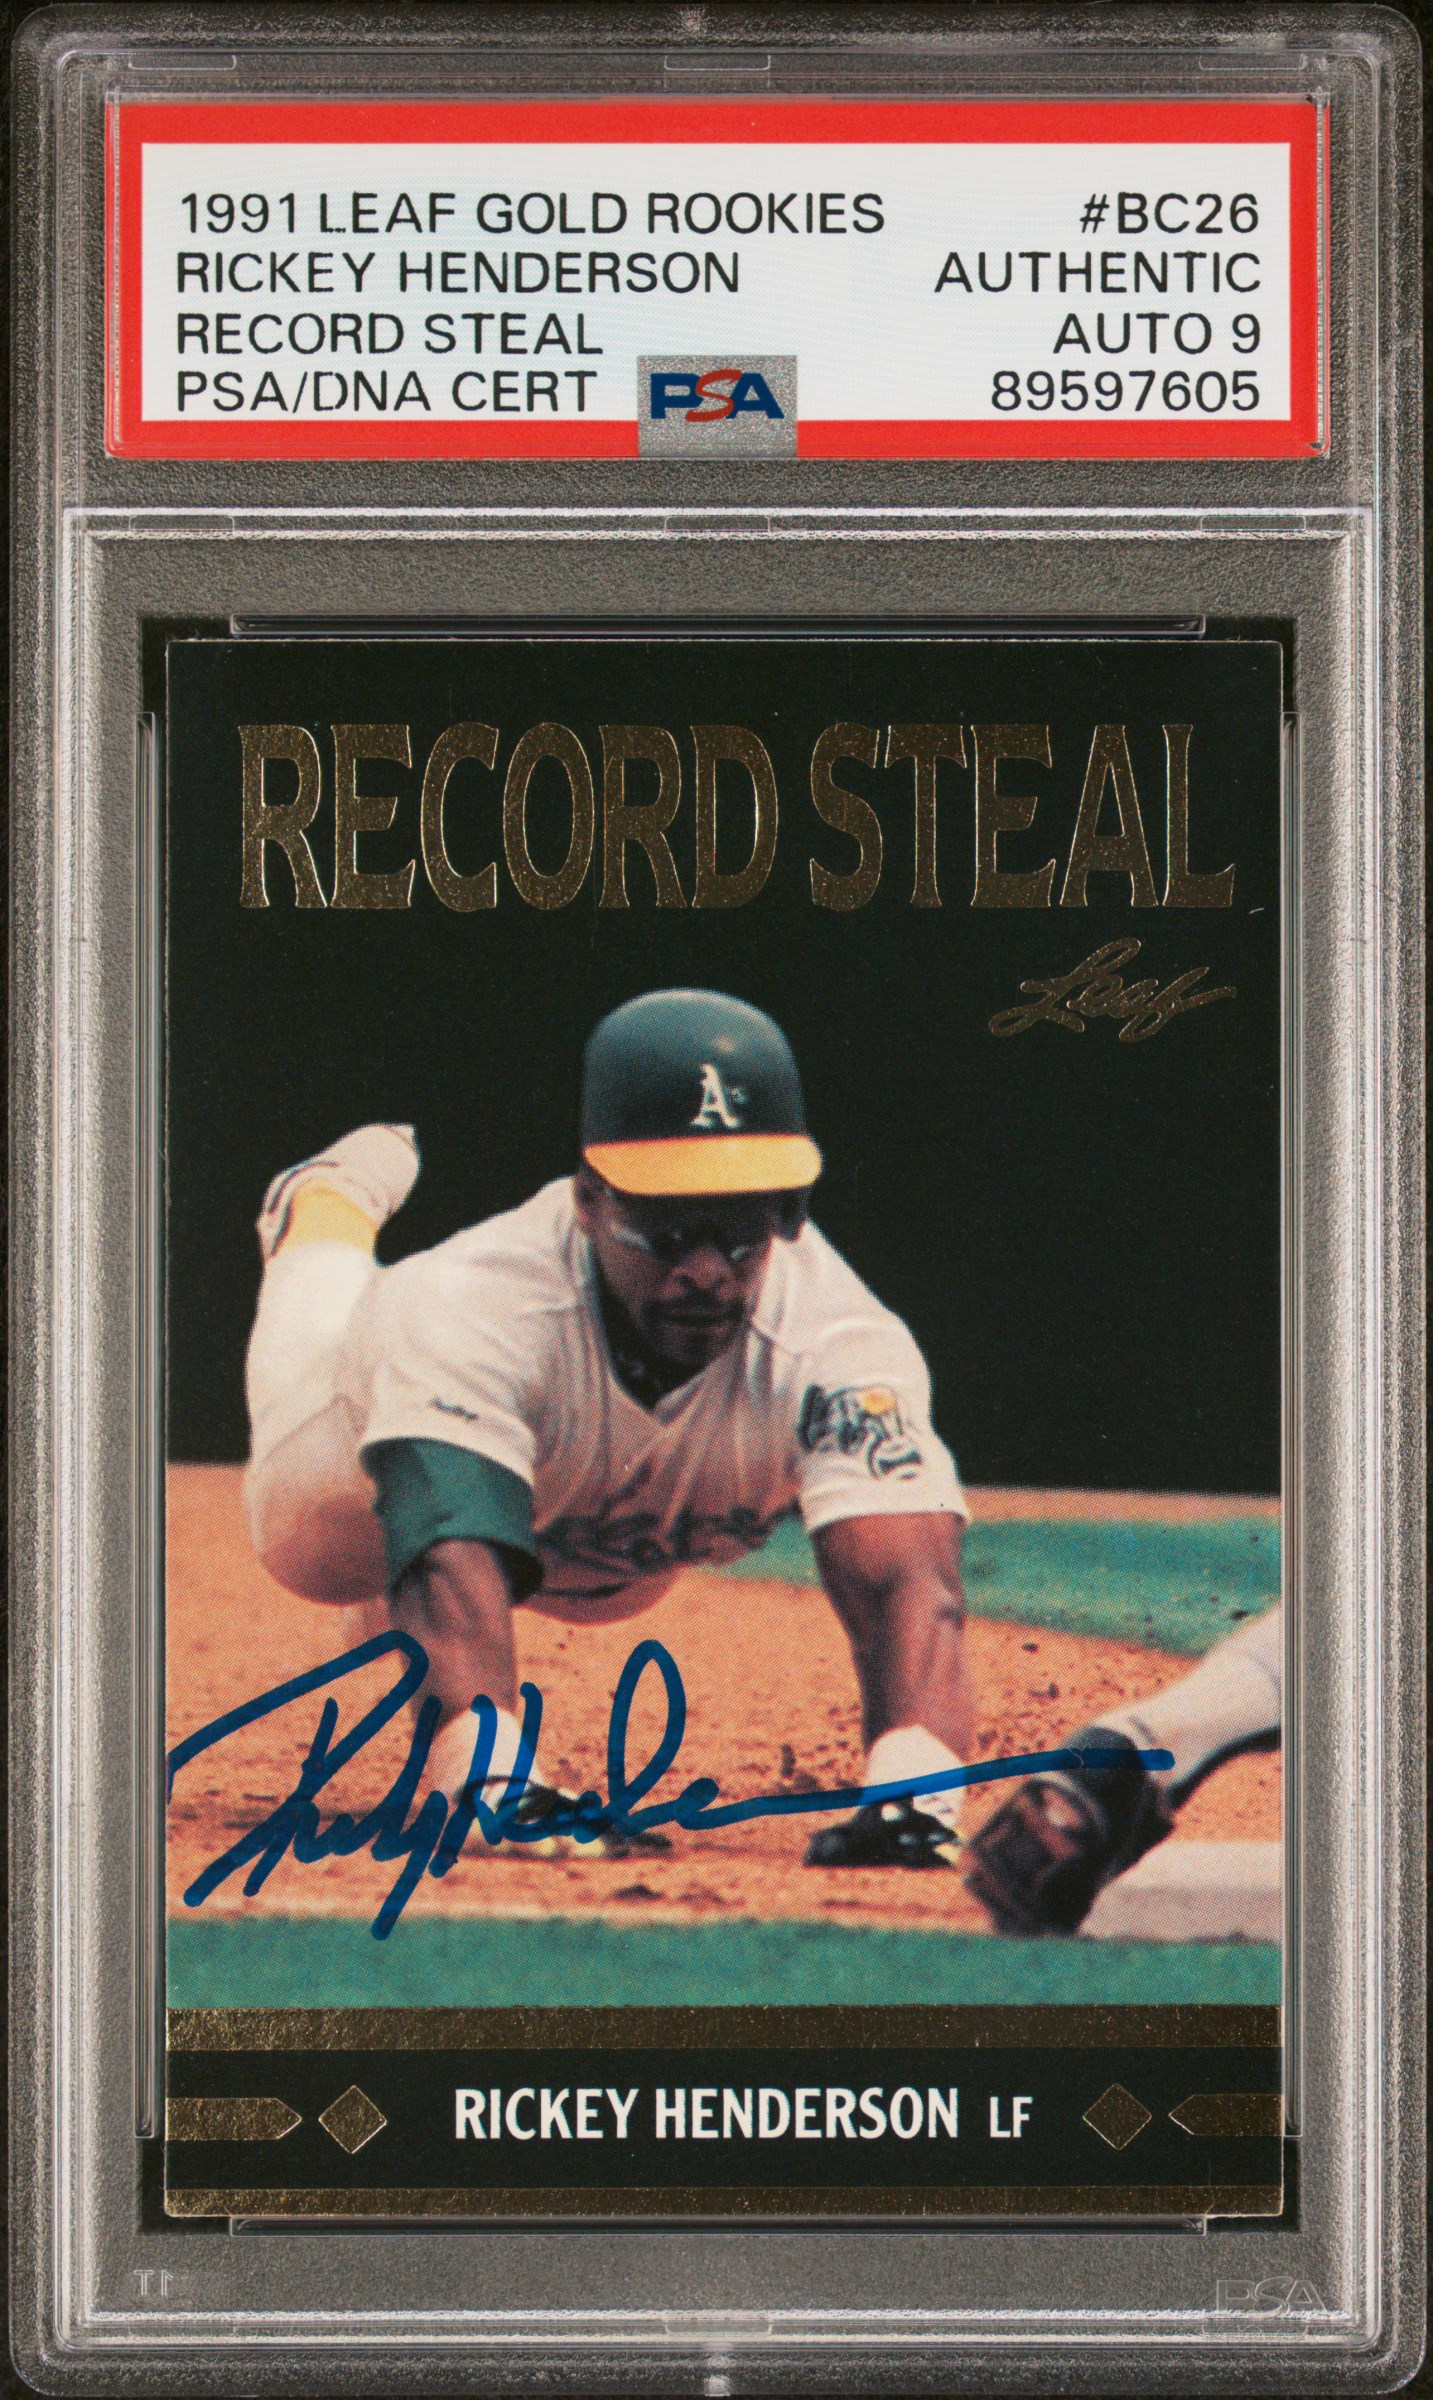 Rickey Henderson 1991 Leaf Gold Rookies Record Steal Card #BC26 Auto PSA 10 7605